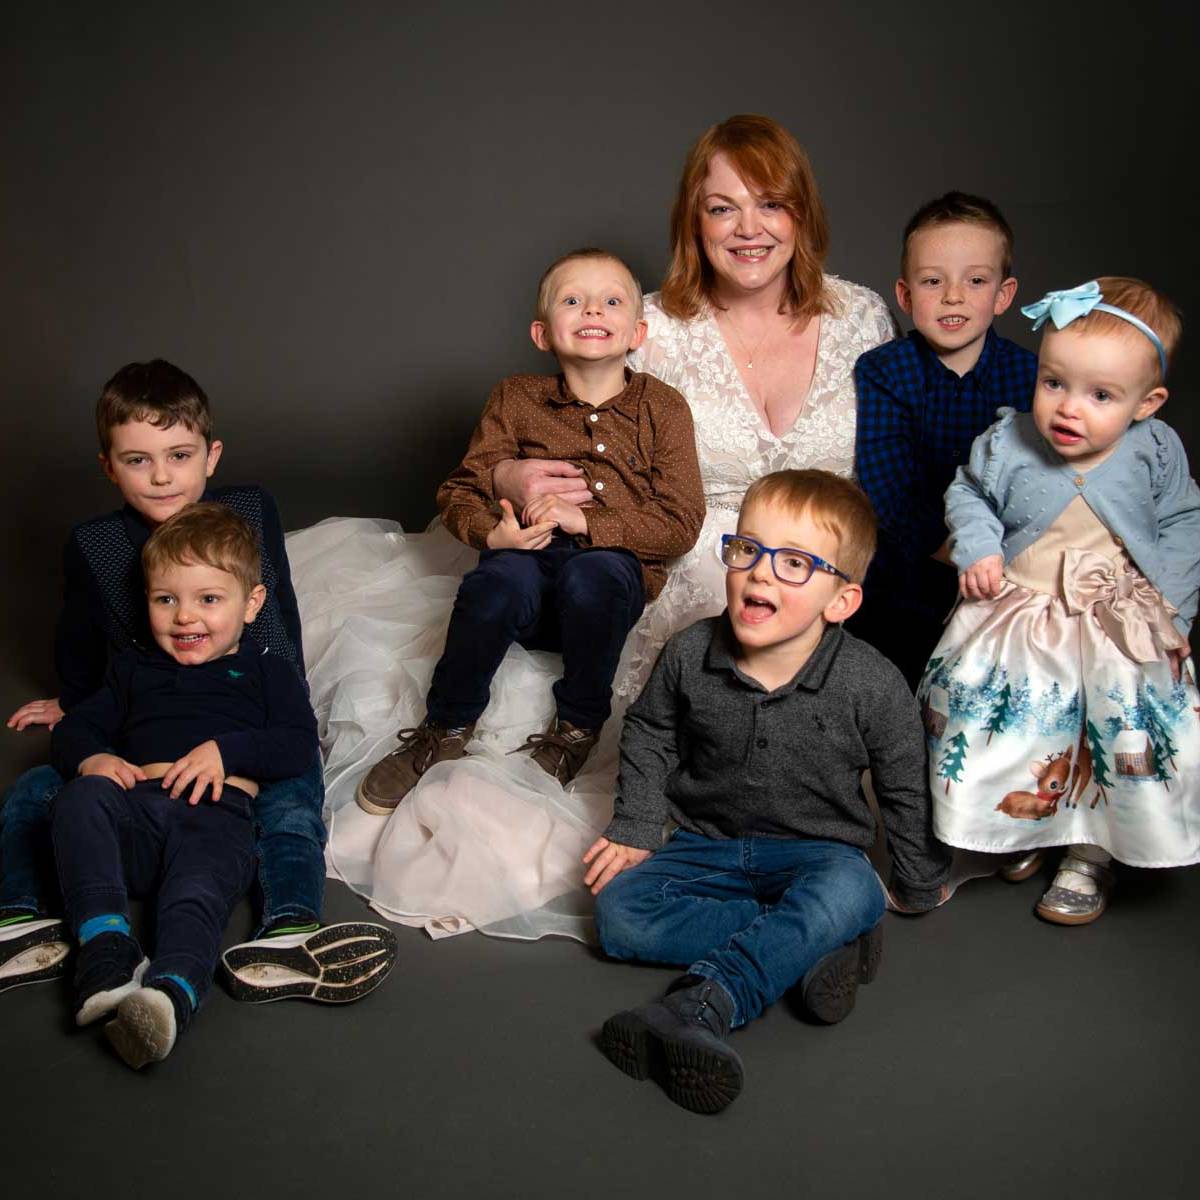 Bride and her nieces and nephews